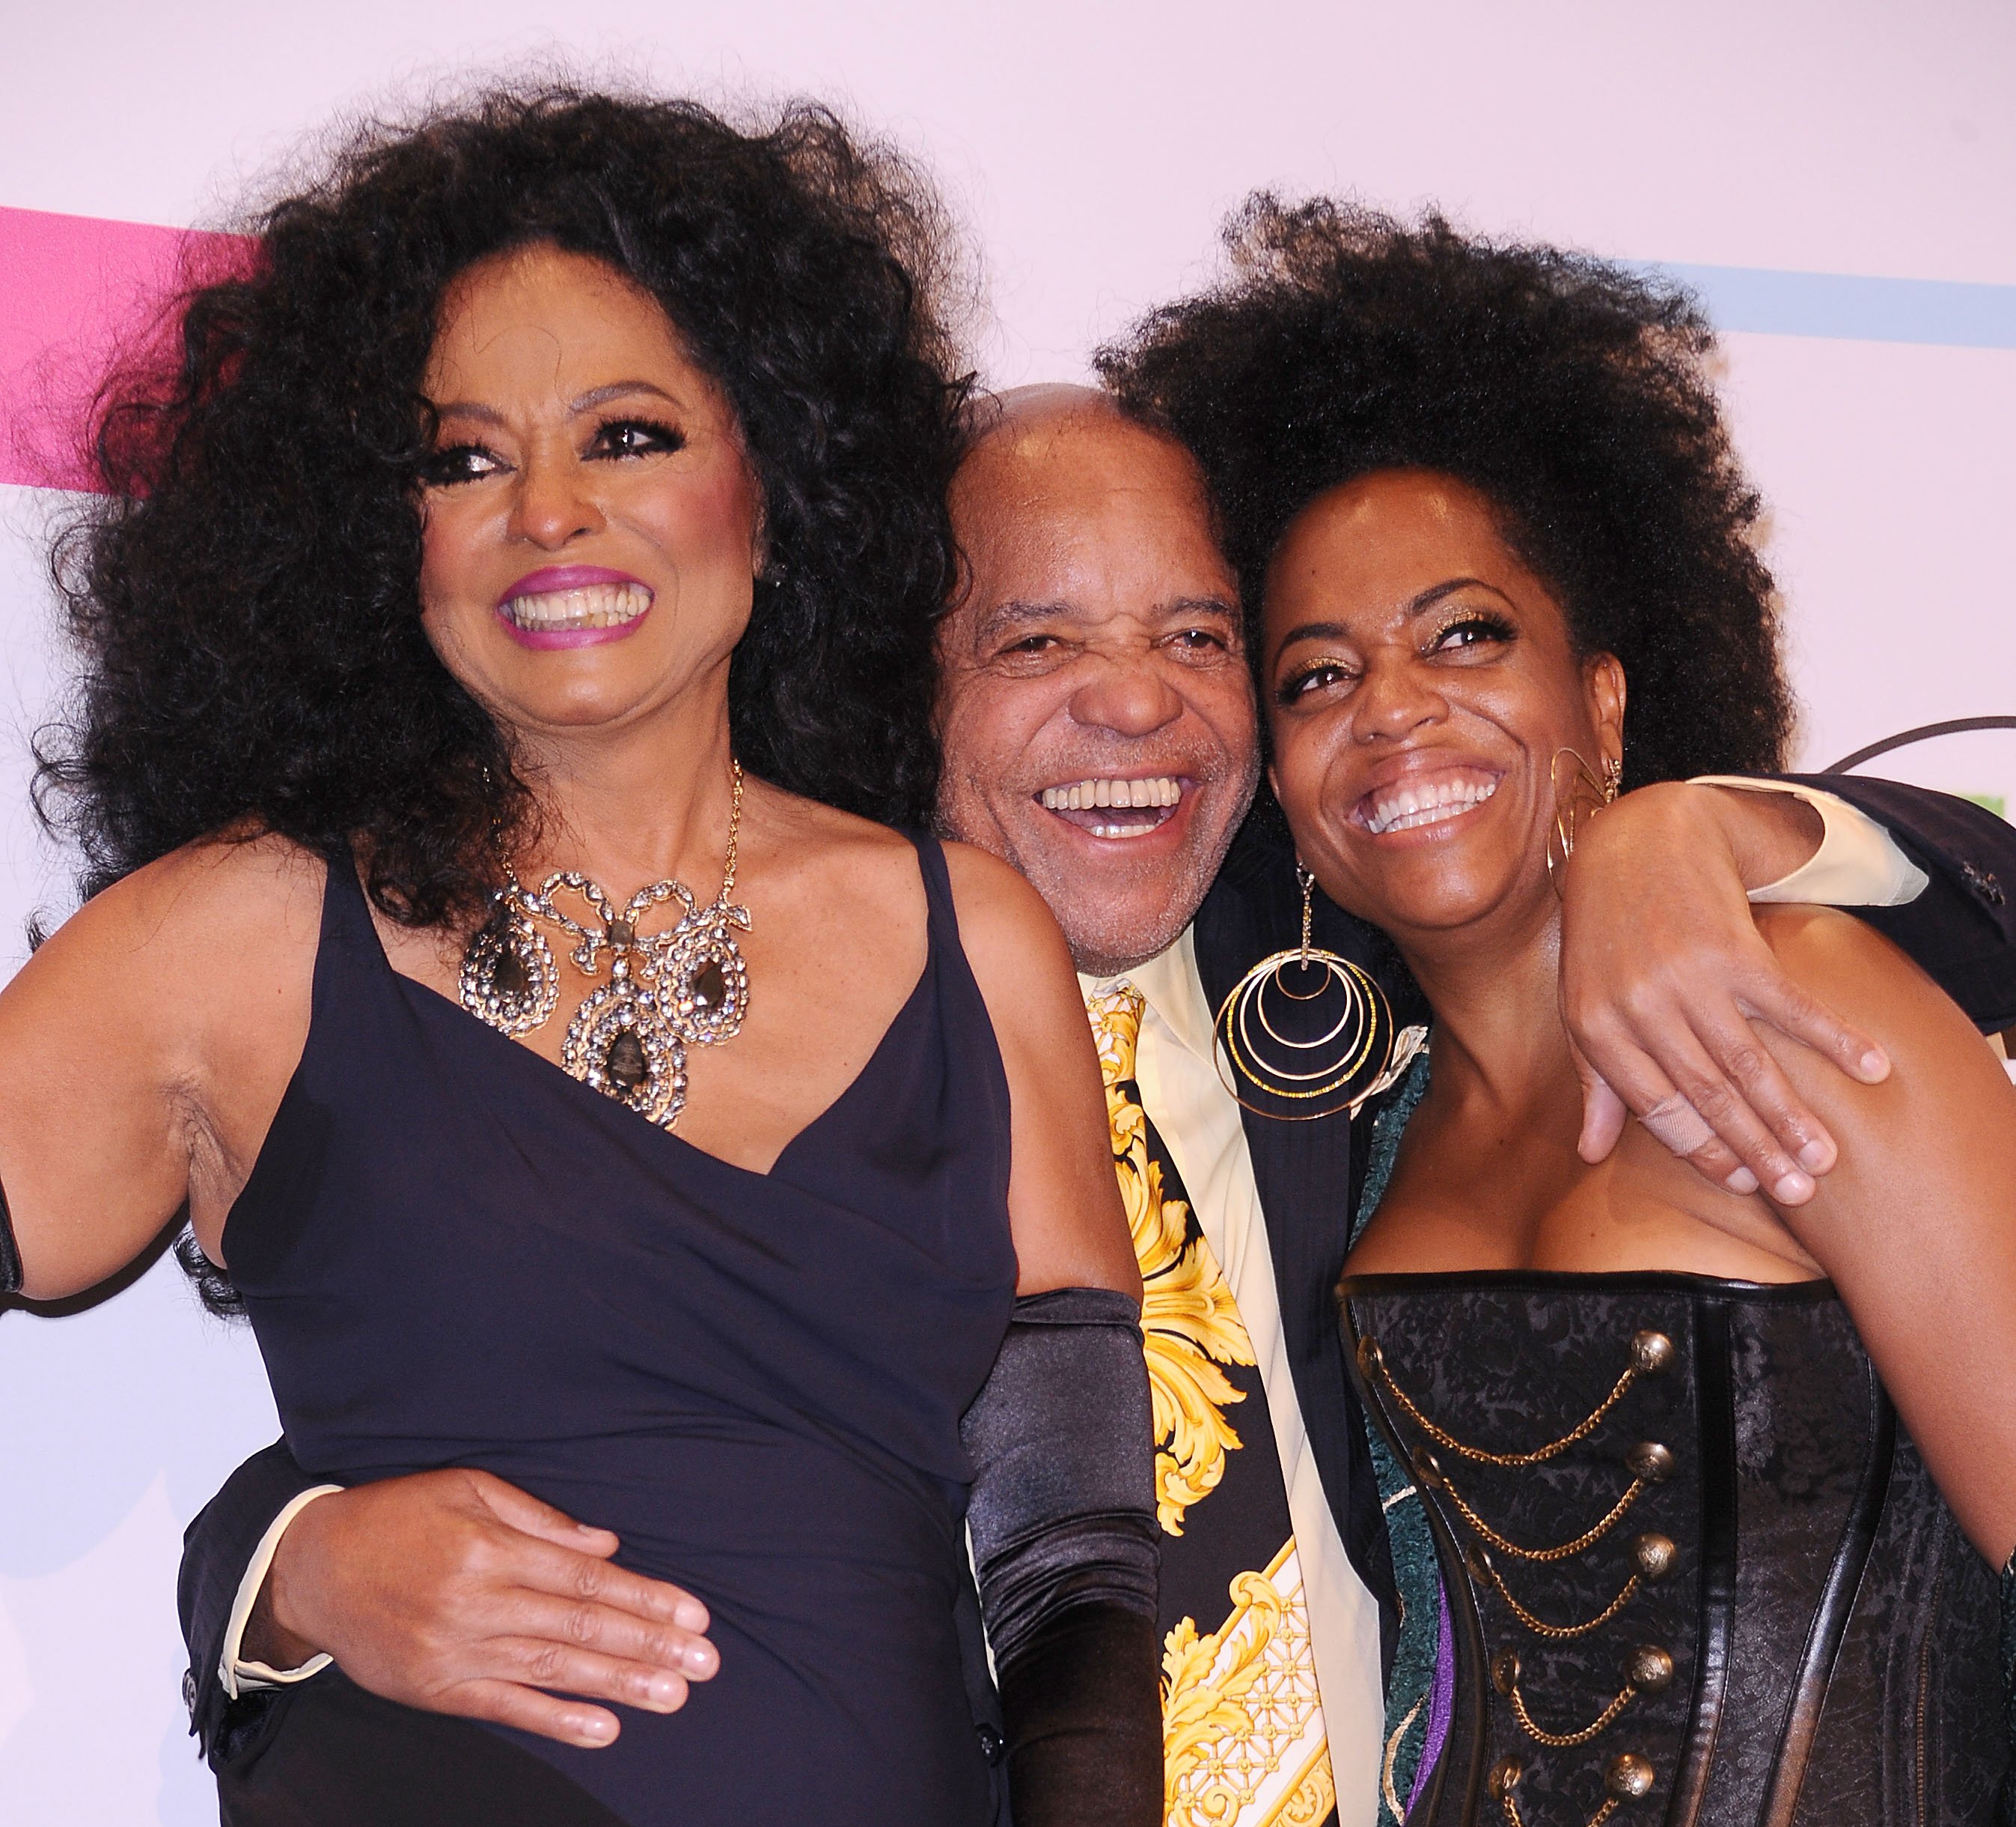 Diana Ross, Berry Gordy, and their daughter Rhonda Ross Kendrick smiling at an event.